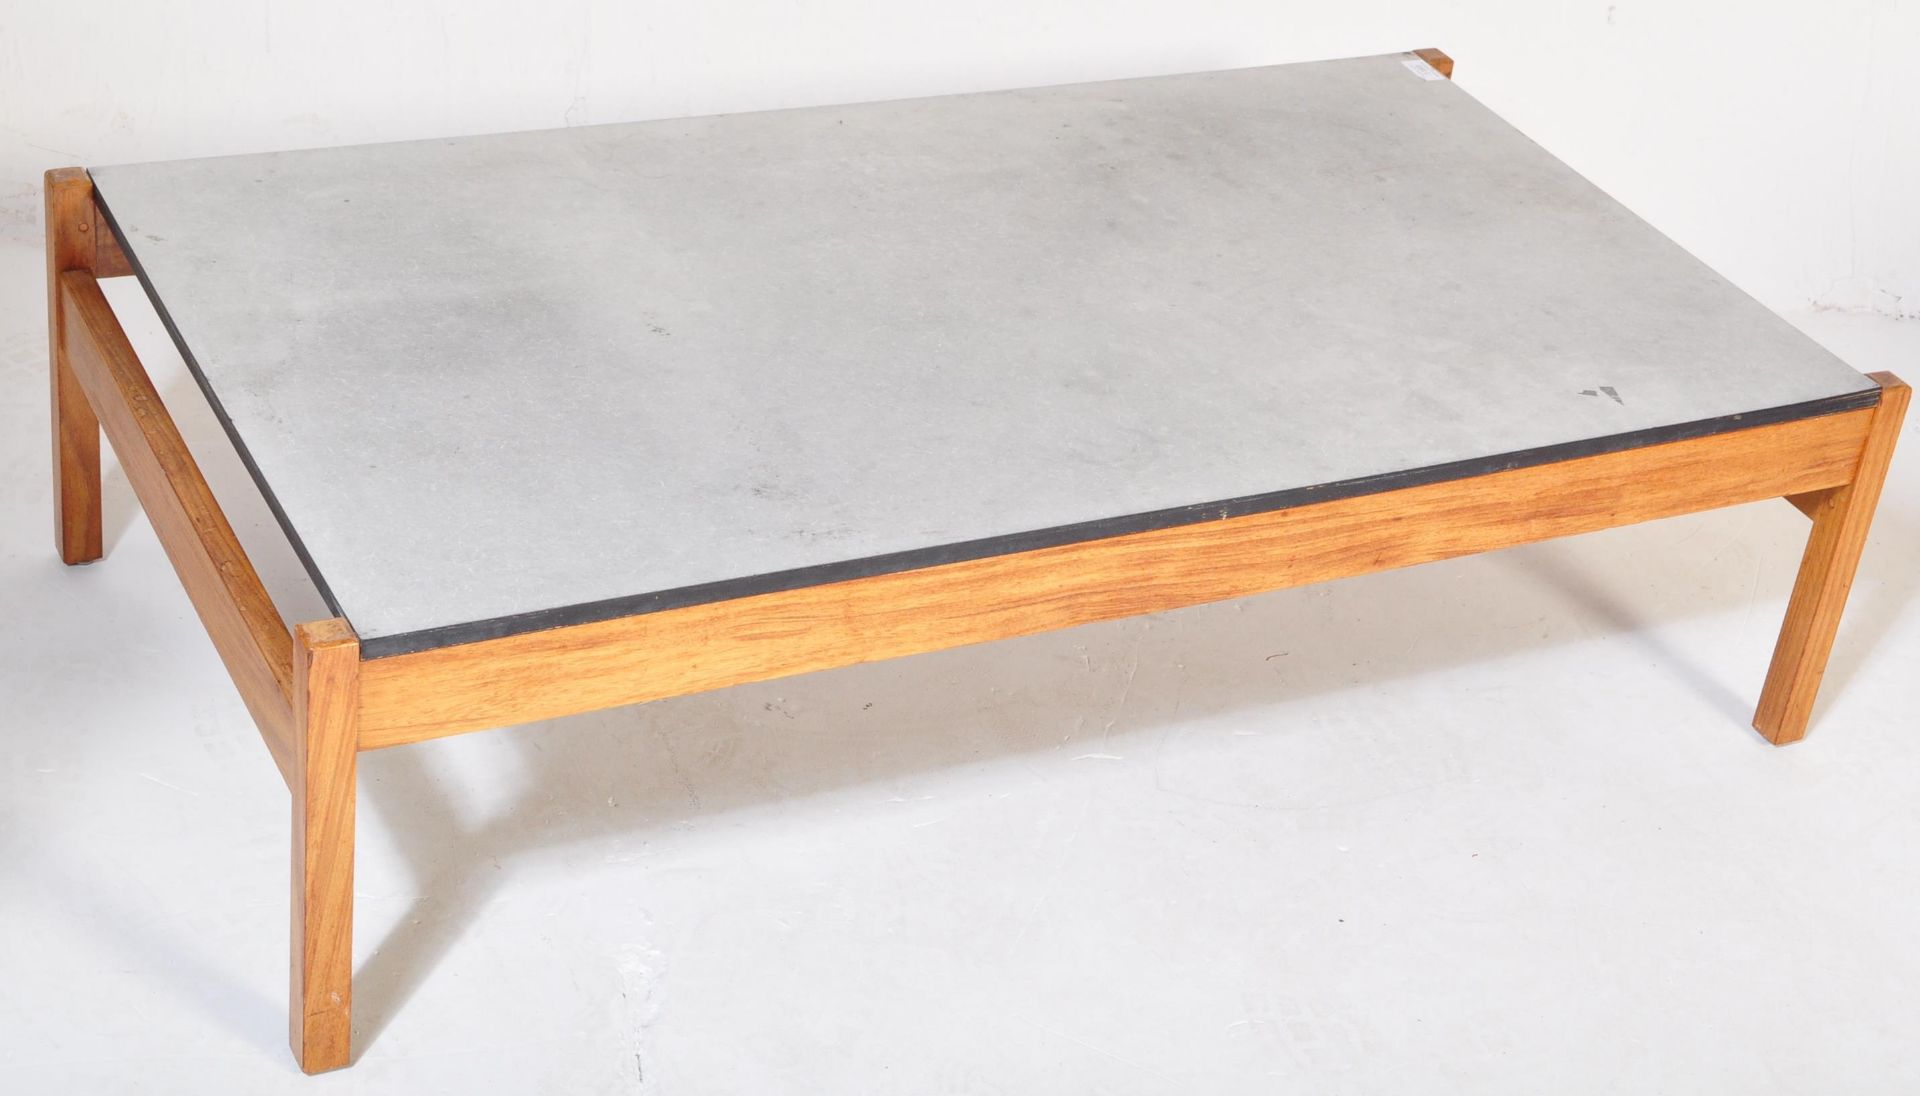 VINTAGE MID CENTURY FAUX MARBLE COFFEE TABLE - Image 2 of 3